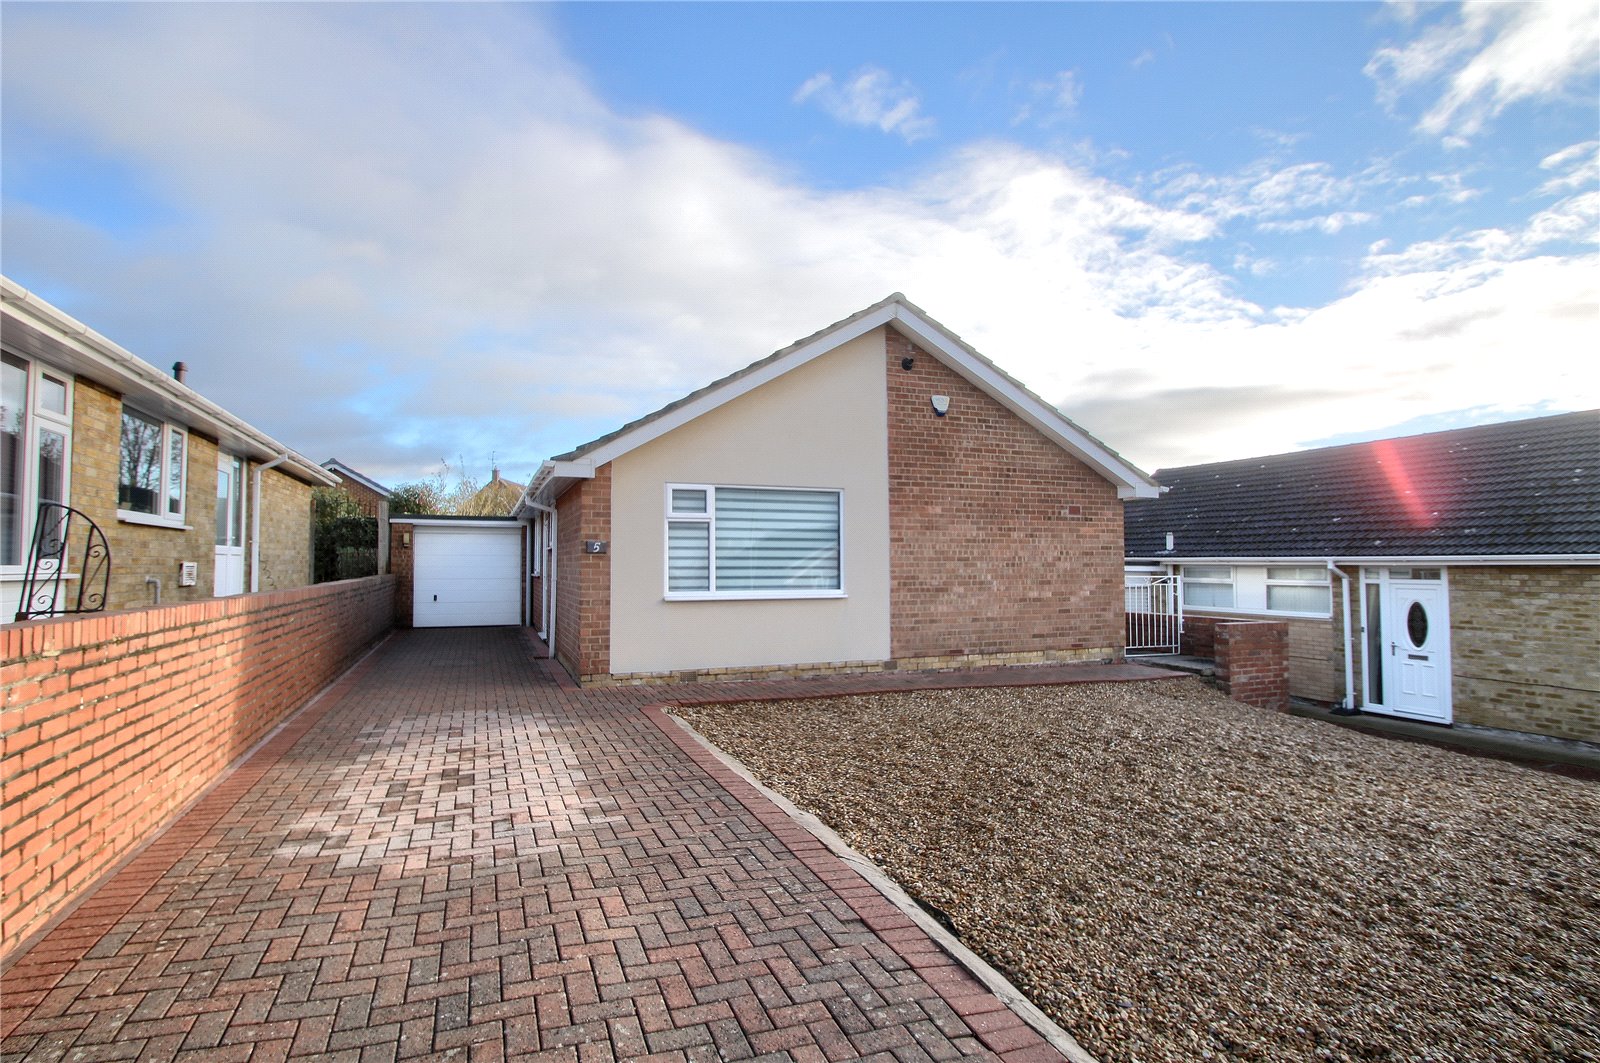 3 bed bungalow for sale in Valley Gardens, Eaglescliffe - Property Image 1